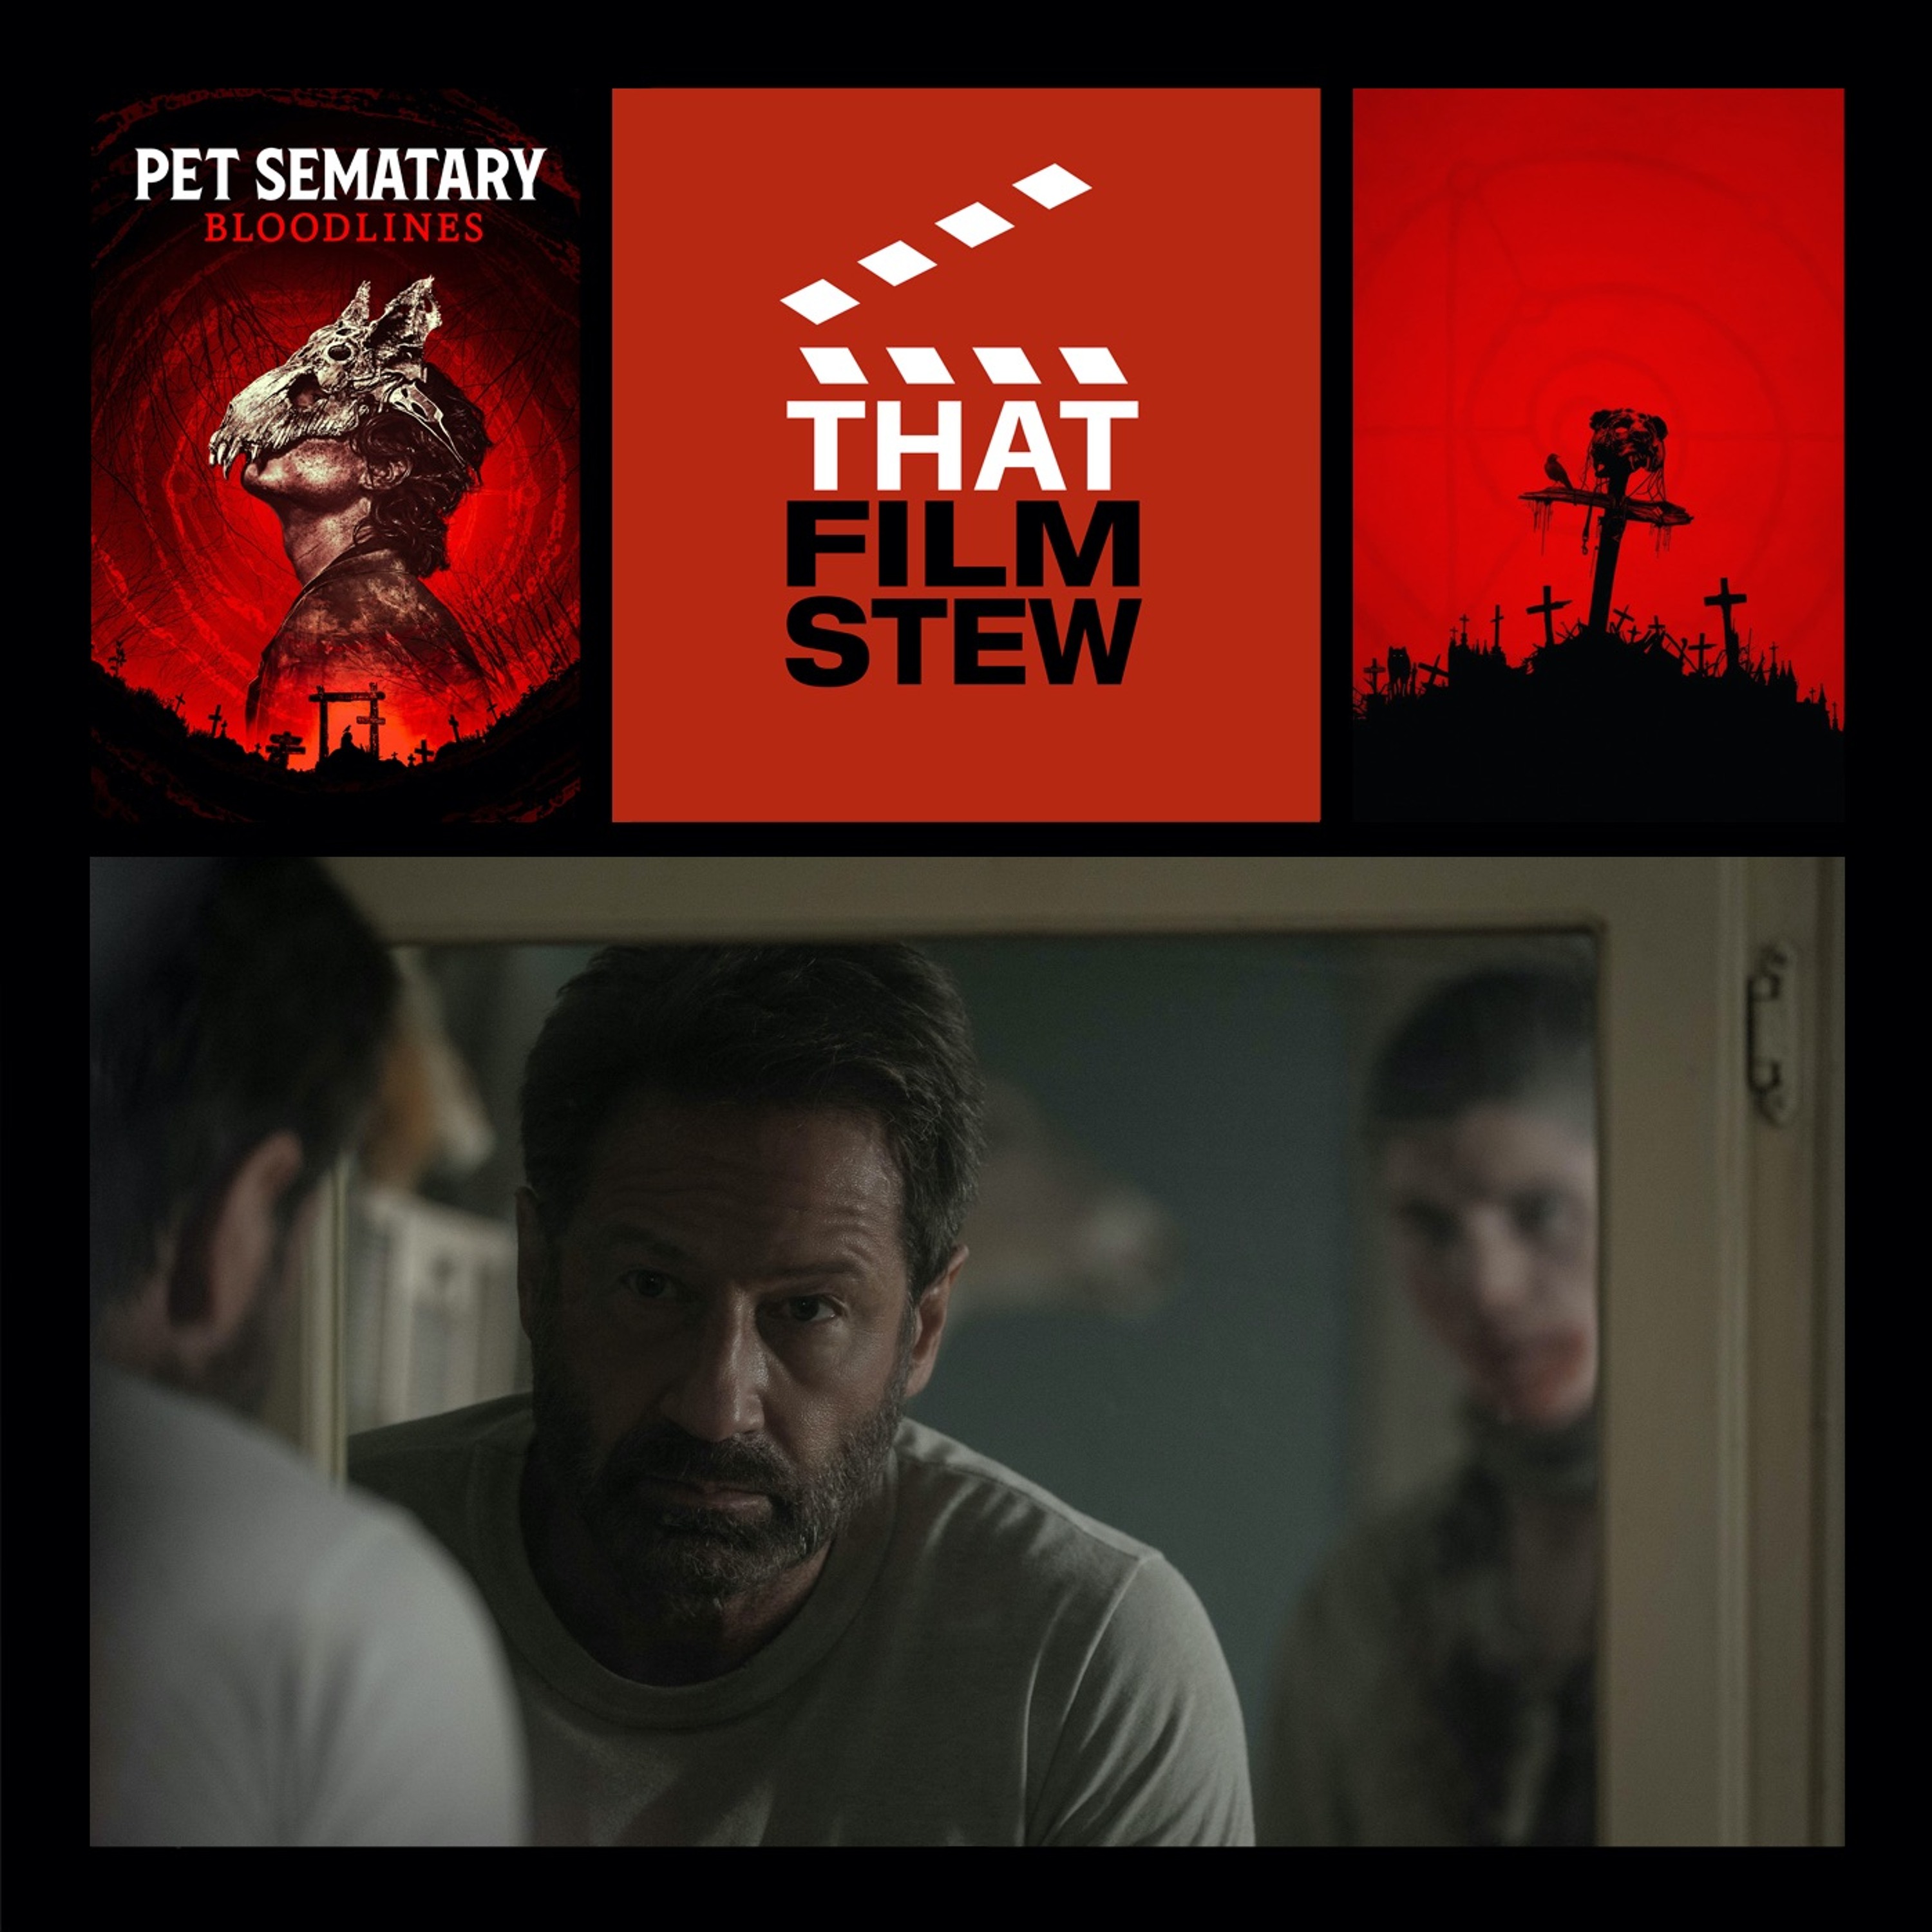 That Film Stew Ep 448 - Pet Sematary: Bloodlines (Review)